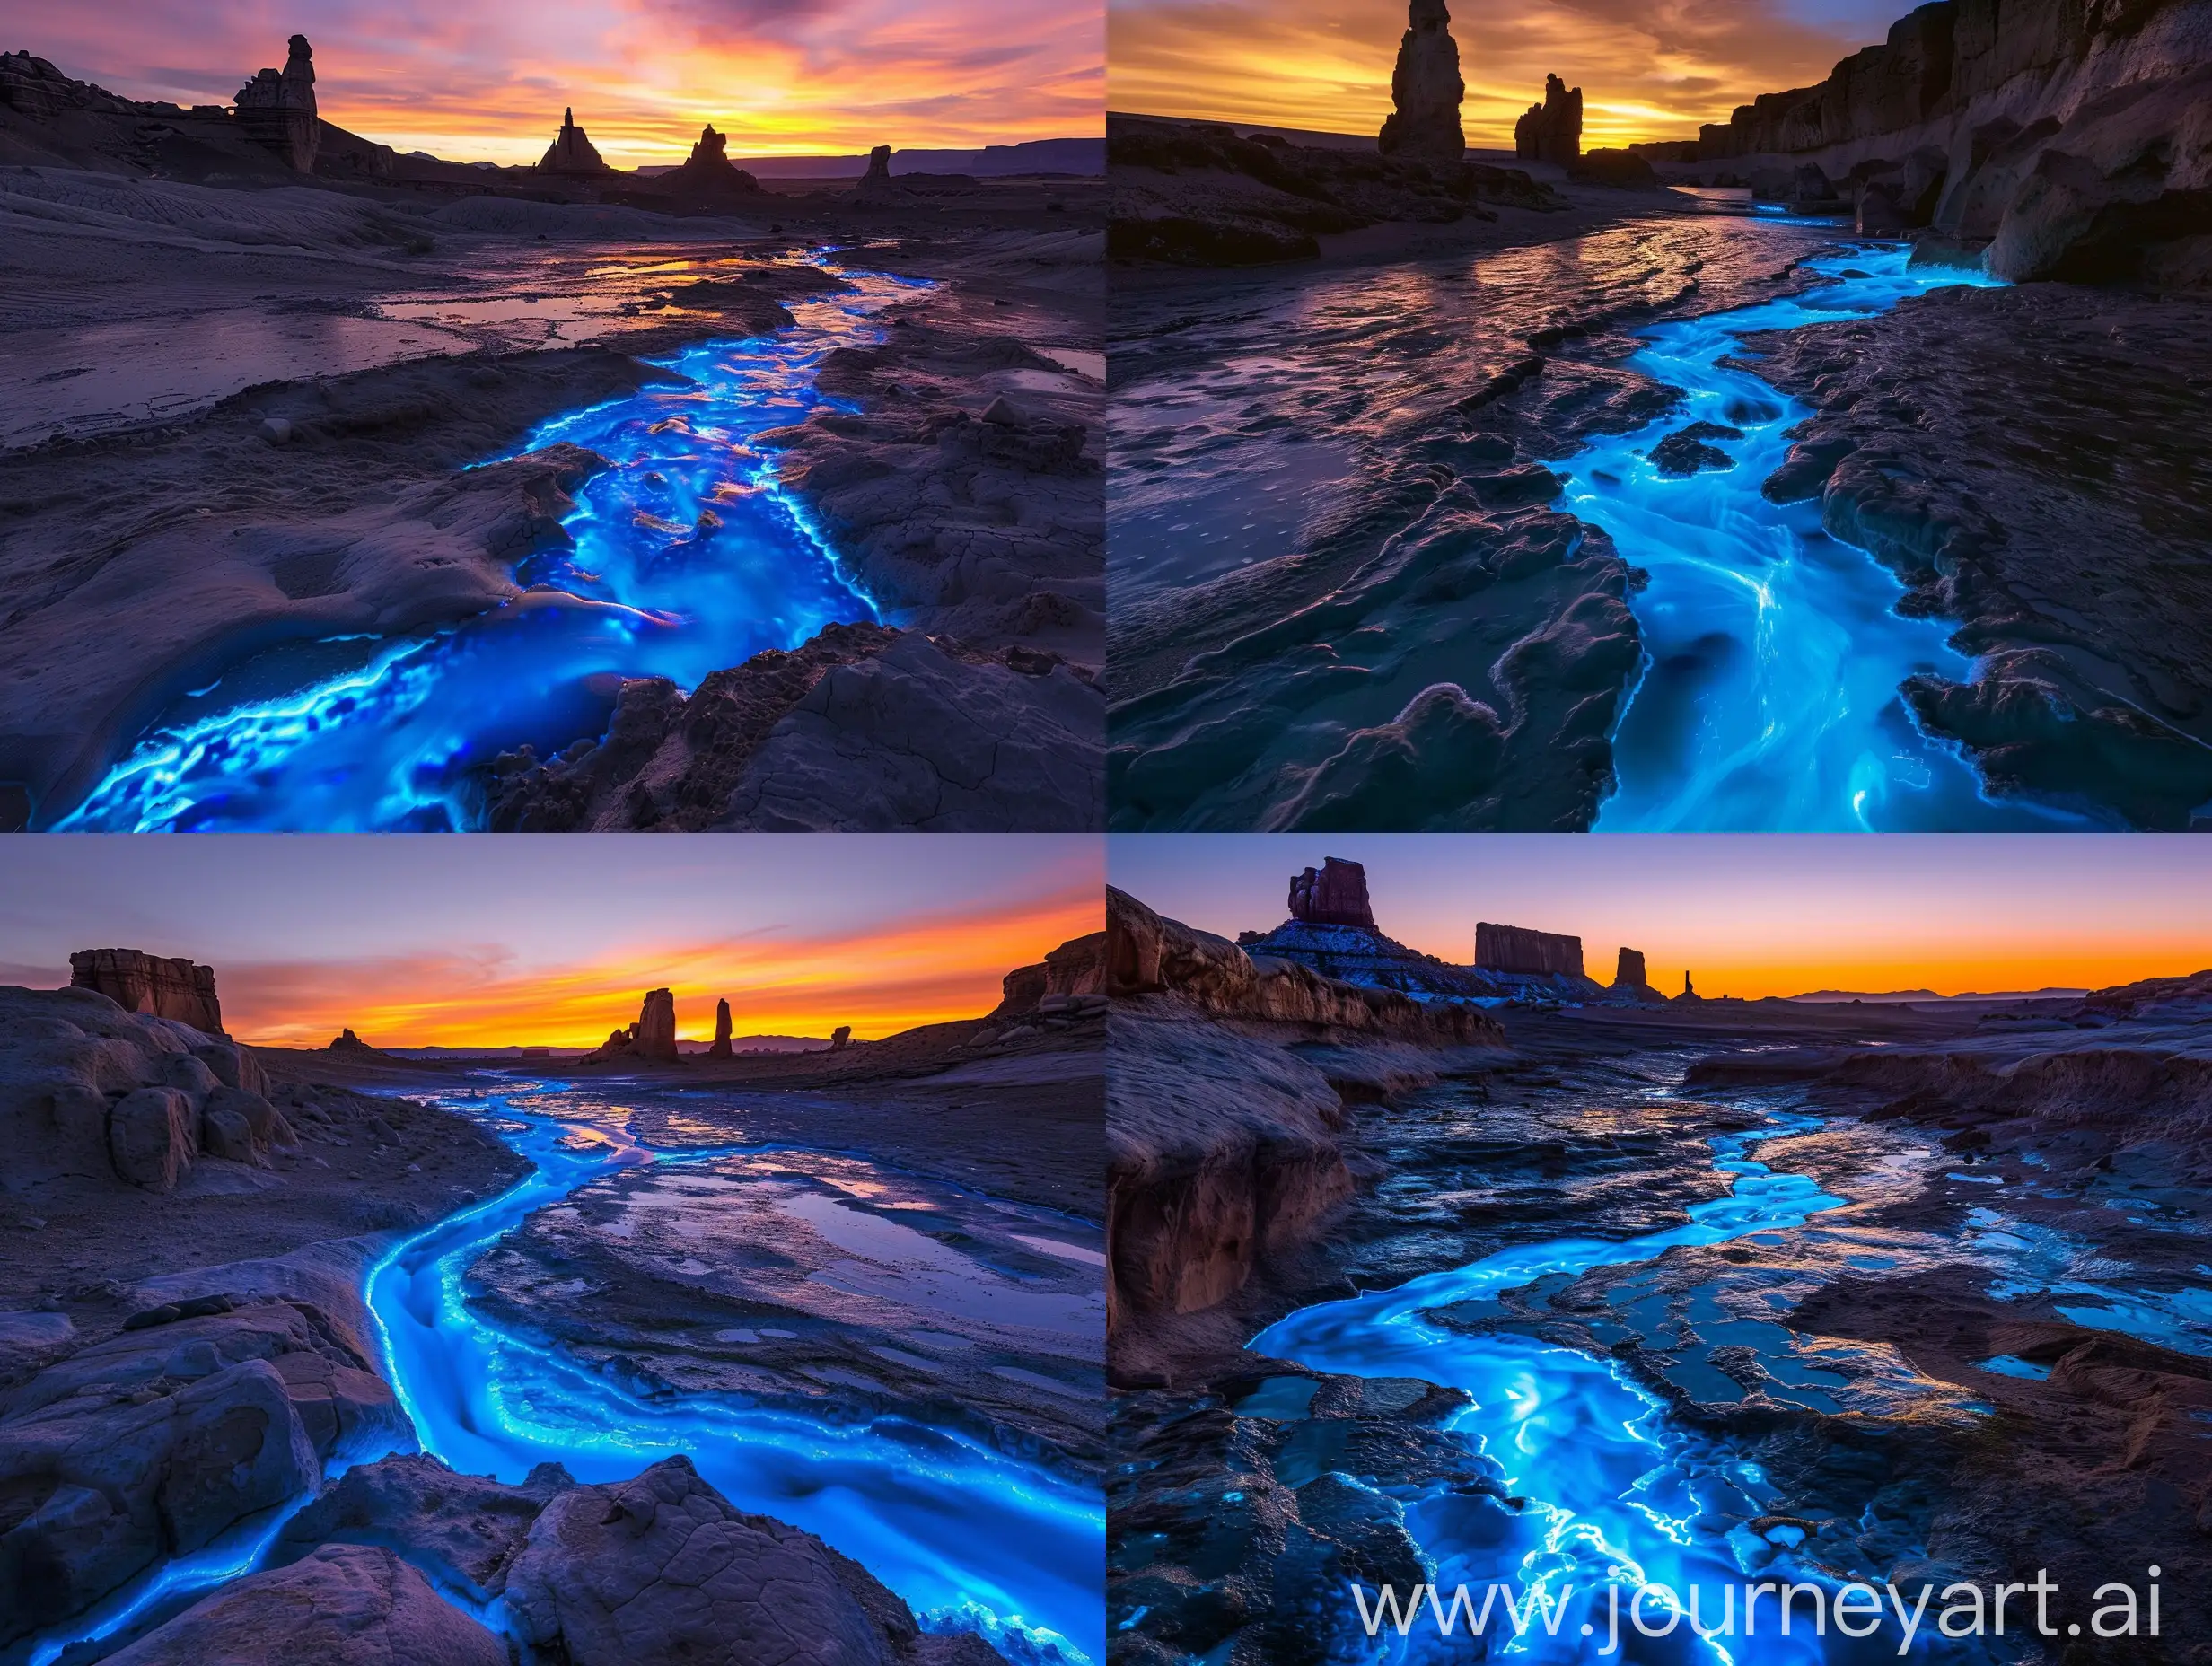 Desert-Monoliths-at-Sunset-Glowing-Blue-River-Flowing